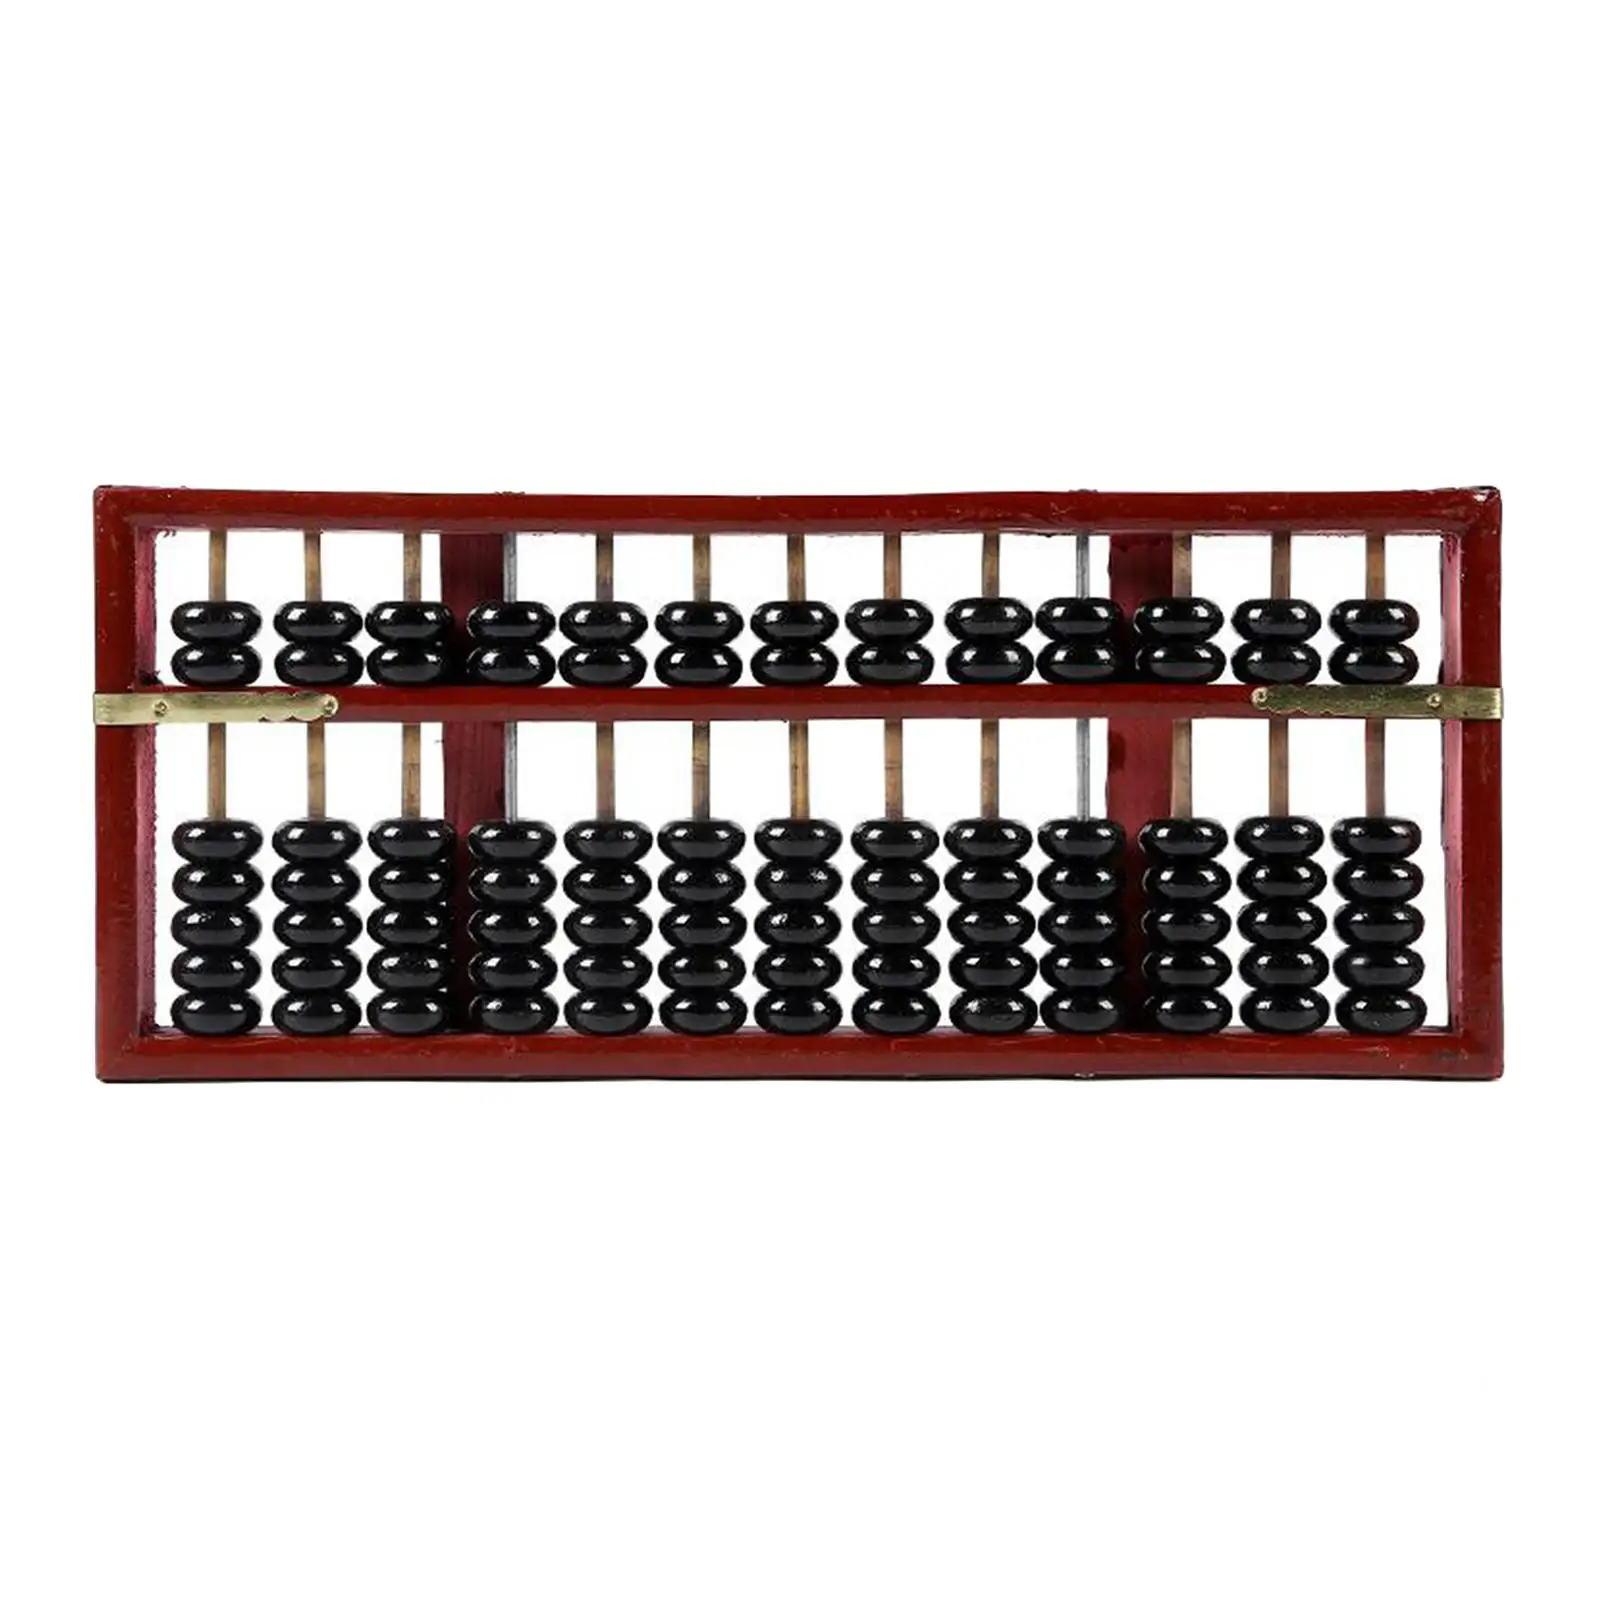 Vintage 13/15/17 Digit Rods Wooden Abacus Wood Frame Beads Chinese Japanese Calculator Mathematics Counting Tool